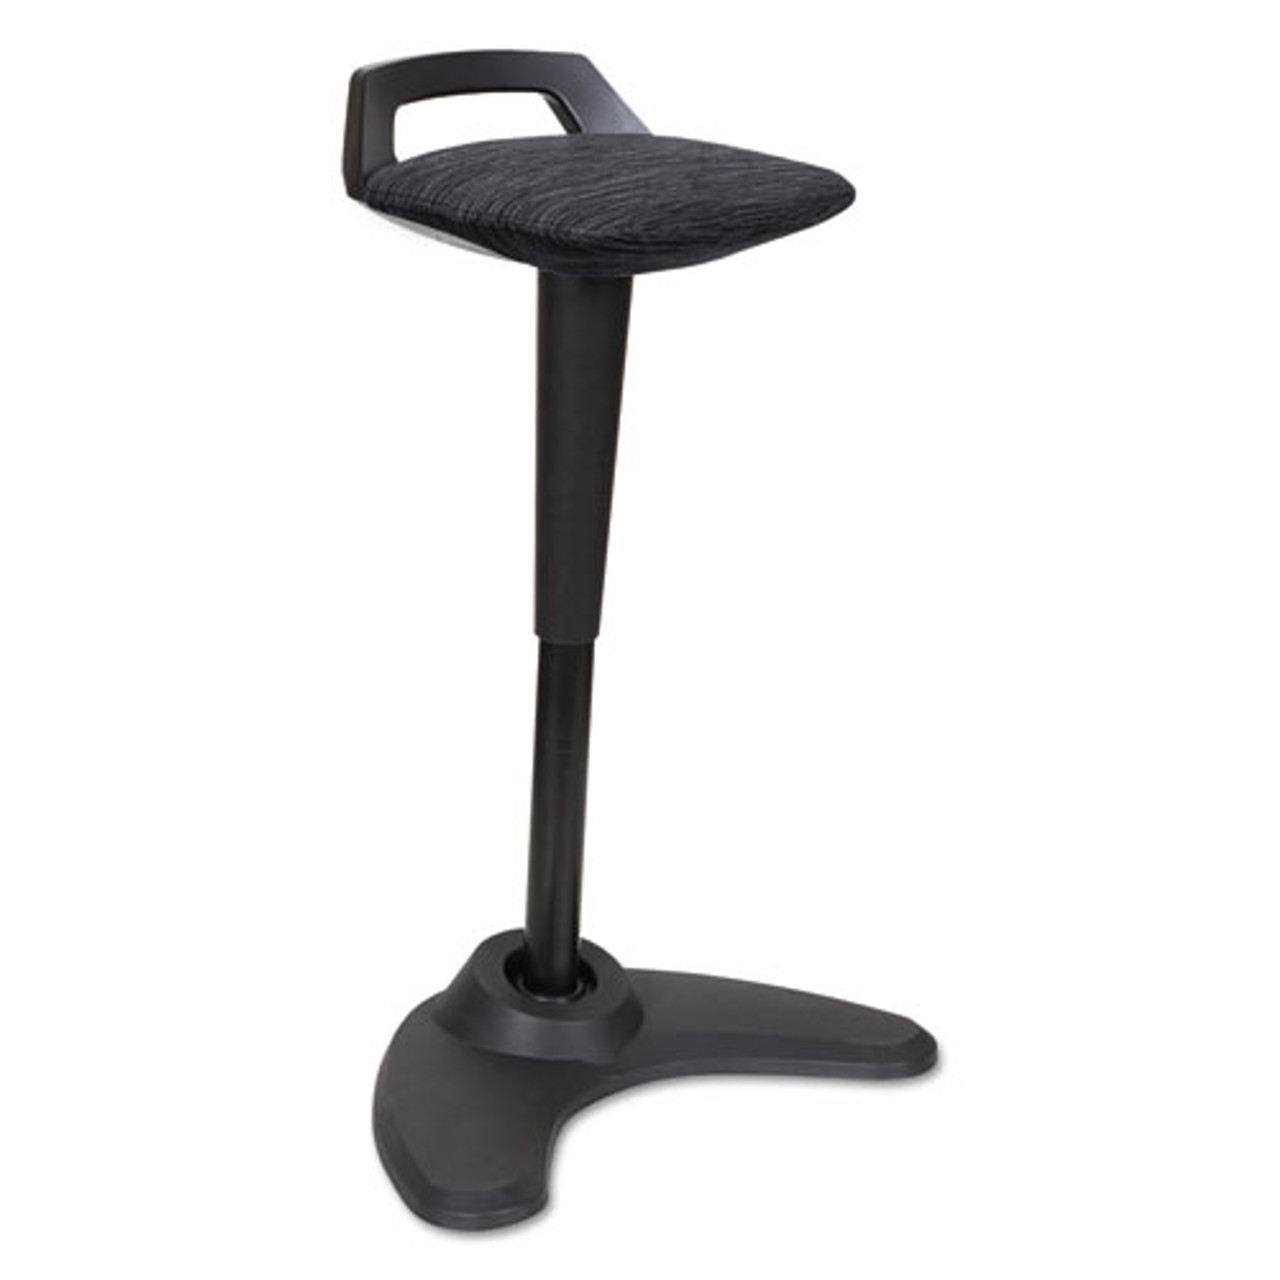 Adaptivergo Sit To Stand Perch Stool, Black With Black Base, #AL-1063